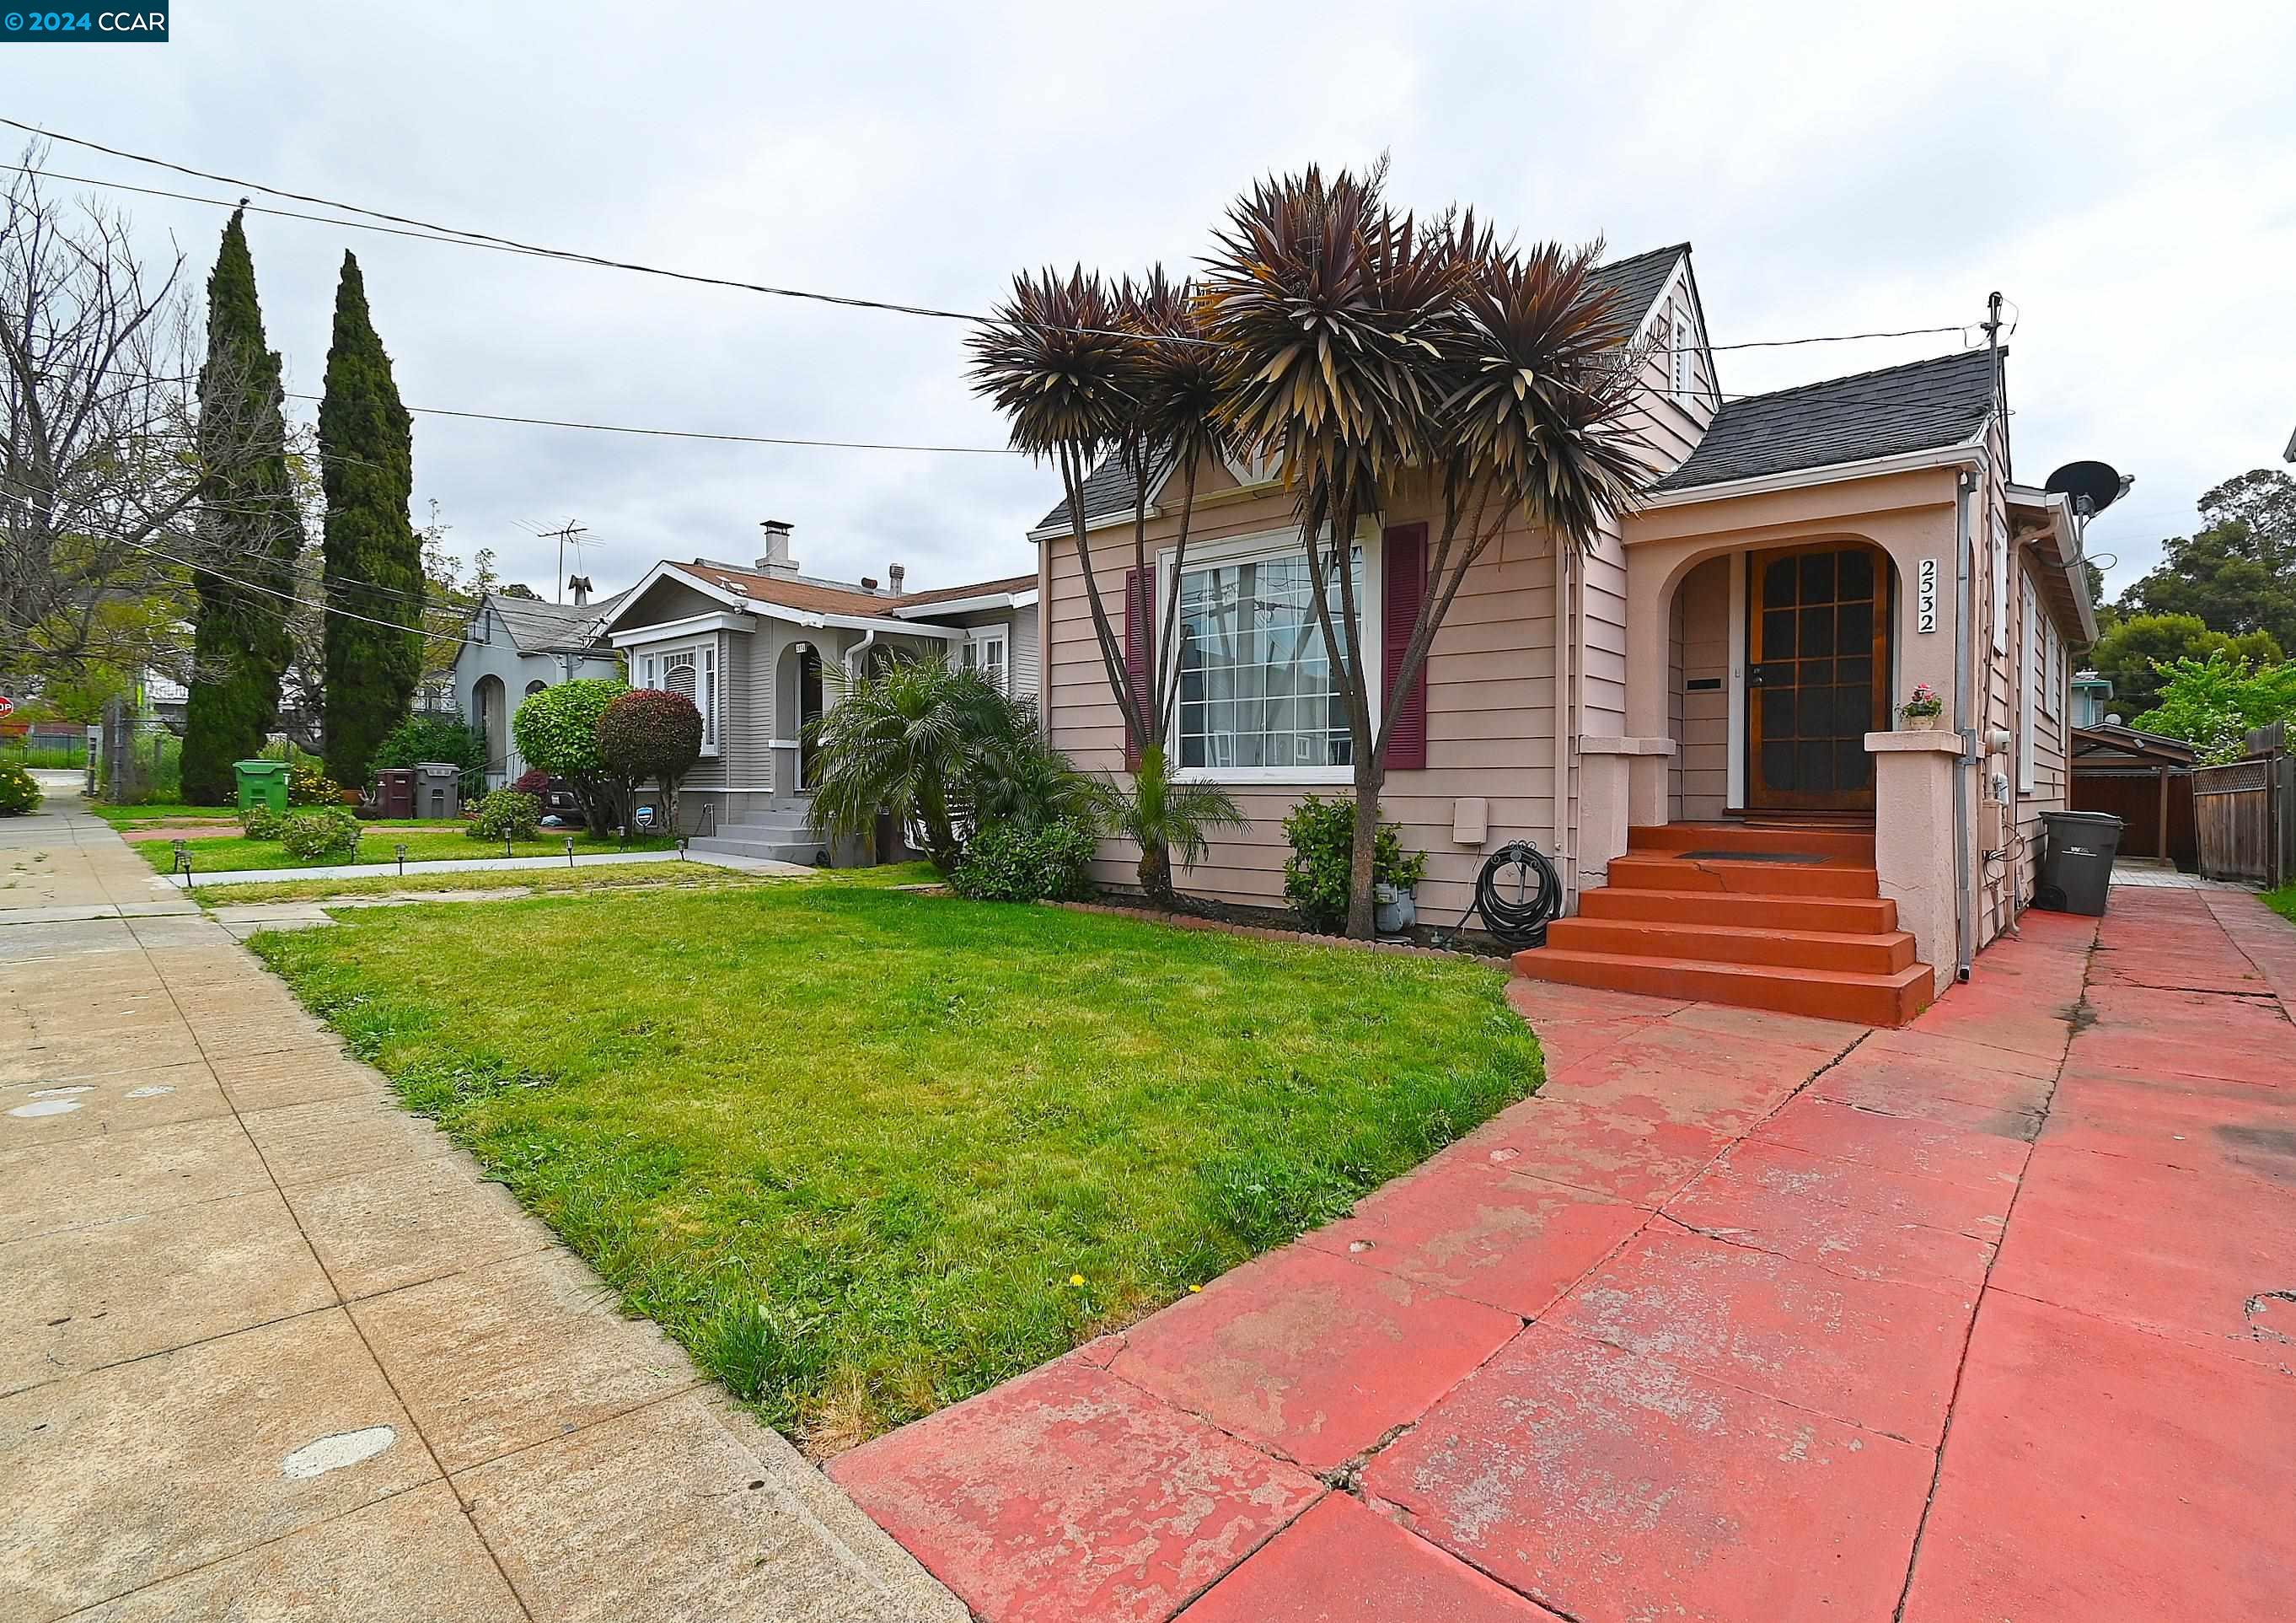 Open Sunday, 4/28, 2p-4p.  Welcome to your charming new home in the vibrant city of Oakland.  This home features 3 bedrooms and 1 bath, original hardwood flooring and a cozy wood burning fireplace with tile surround that creates warmth and history.  The spacious and updated eat-in kitchen is perfect for preparing delicious meals and boasts stainless steel appliances, plenty of cabinets and an abundance of counter space.  The sizeable formal dining room offers a touch of elegance.  Enjoy year round comfort and energy efficiency from the dual pane windows, central heating with a newer furnace, water heater and the roof is about 10 years young. Convenience is key with a dedicated laundry room with additional cabinets for storage.  Venture outside to the backyard, where a charming gazebo provides a tranquil spot to relax, unwind, entertain guests, or dine al fresco.  A convenient shed offers extra storage for your gardening tools or outdoor equipment.  This home is ideal for those seeking a retreat in a bustling city.  Don't miss out on the opportunity to make this home your own!